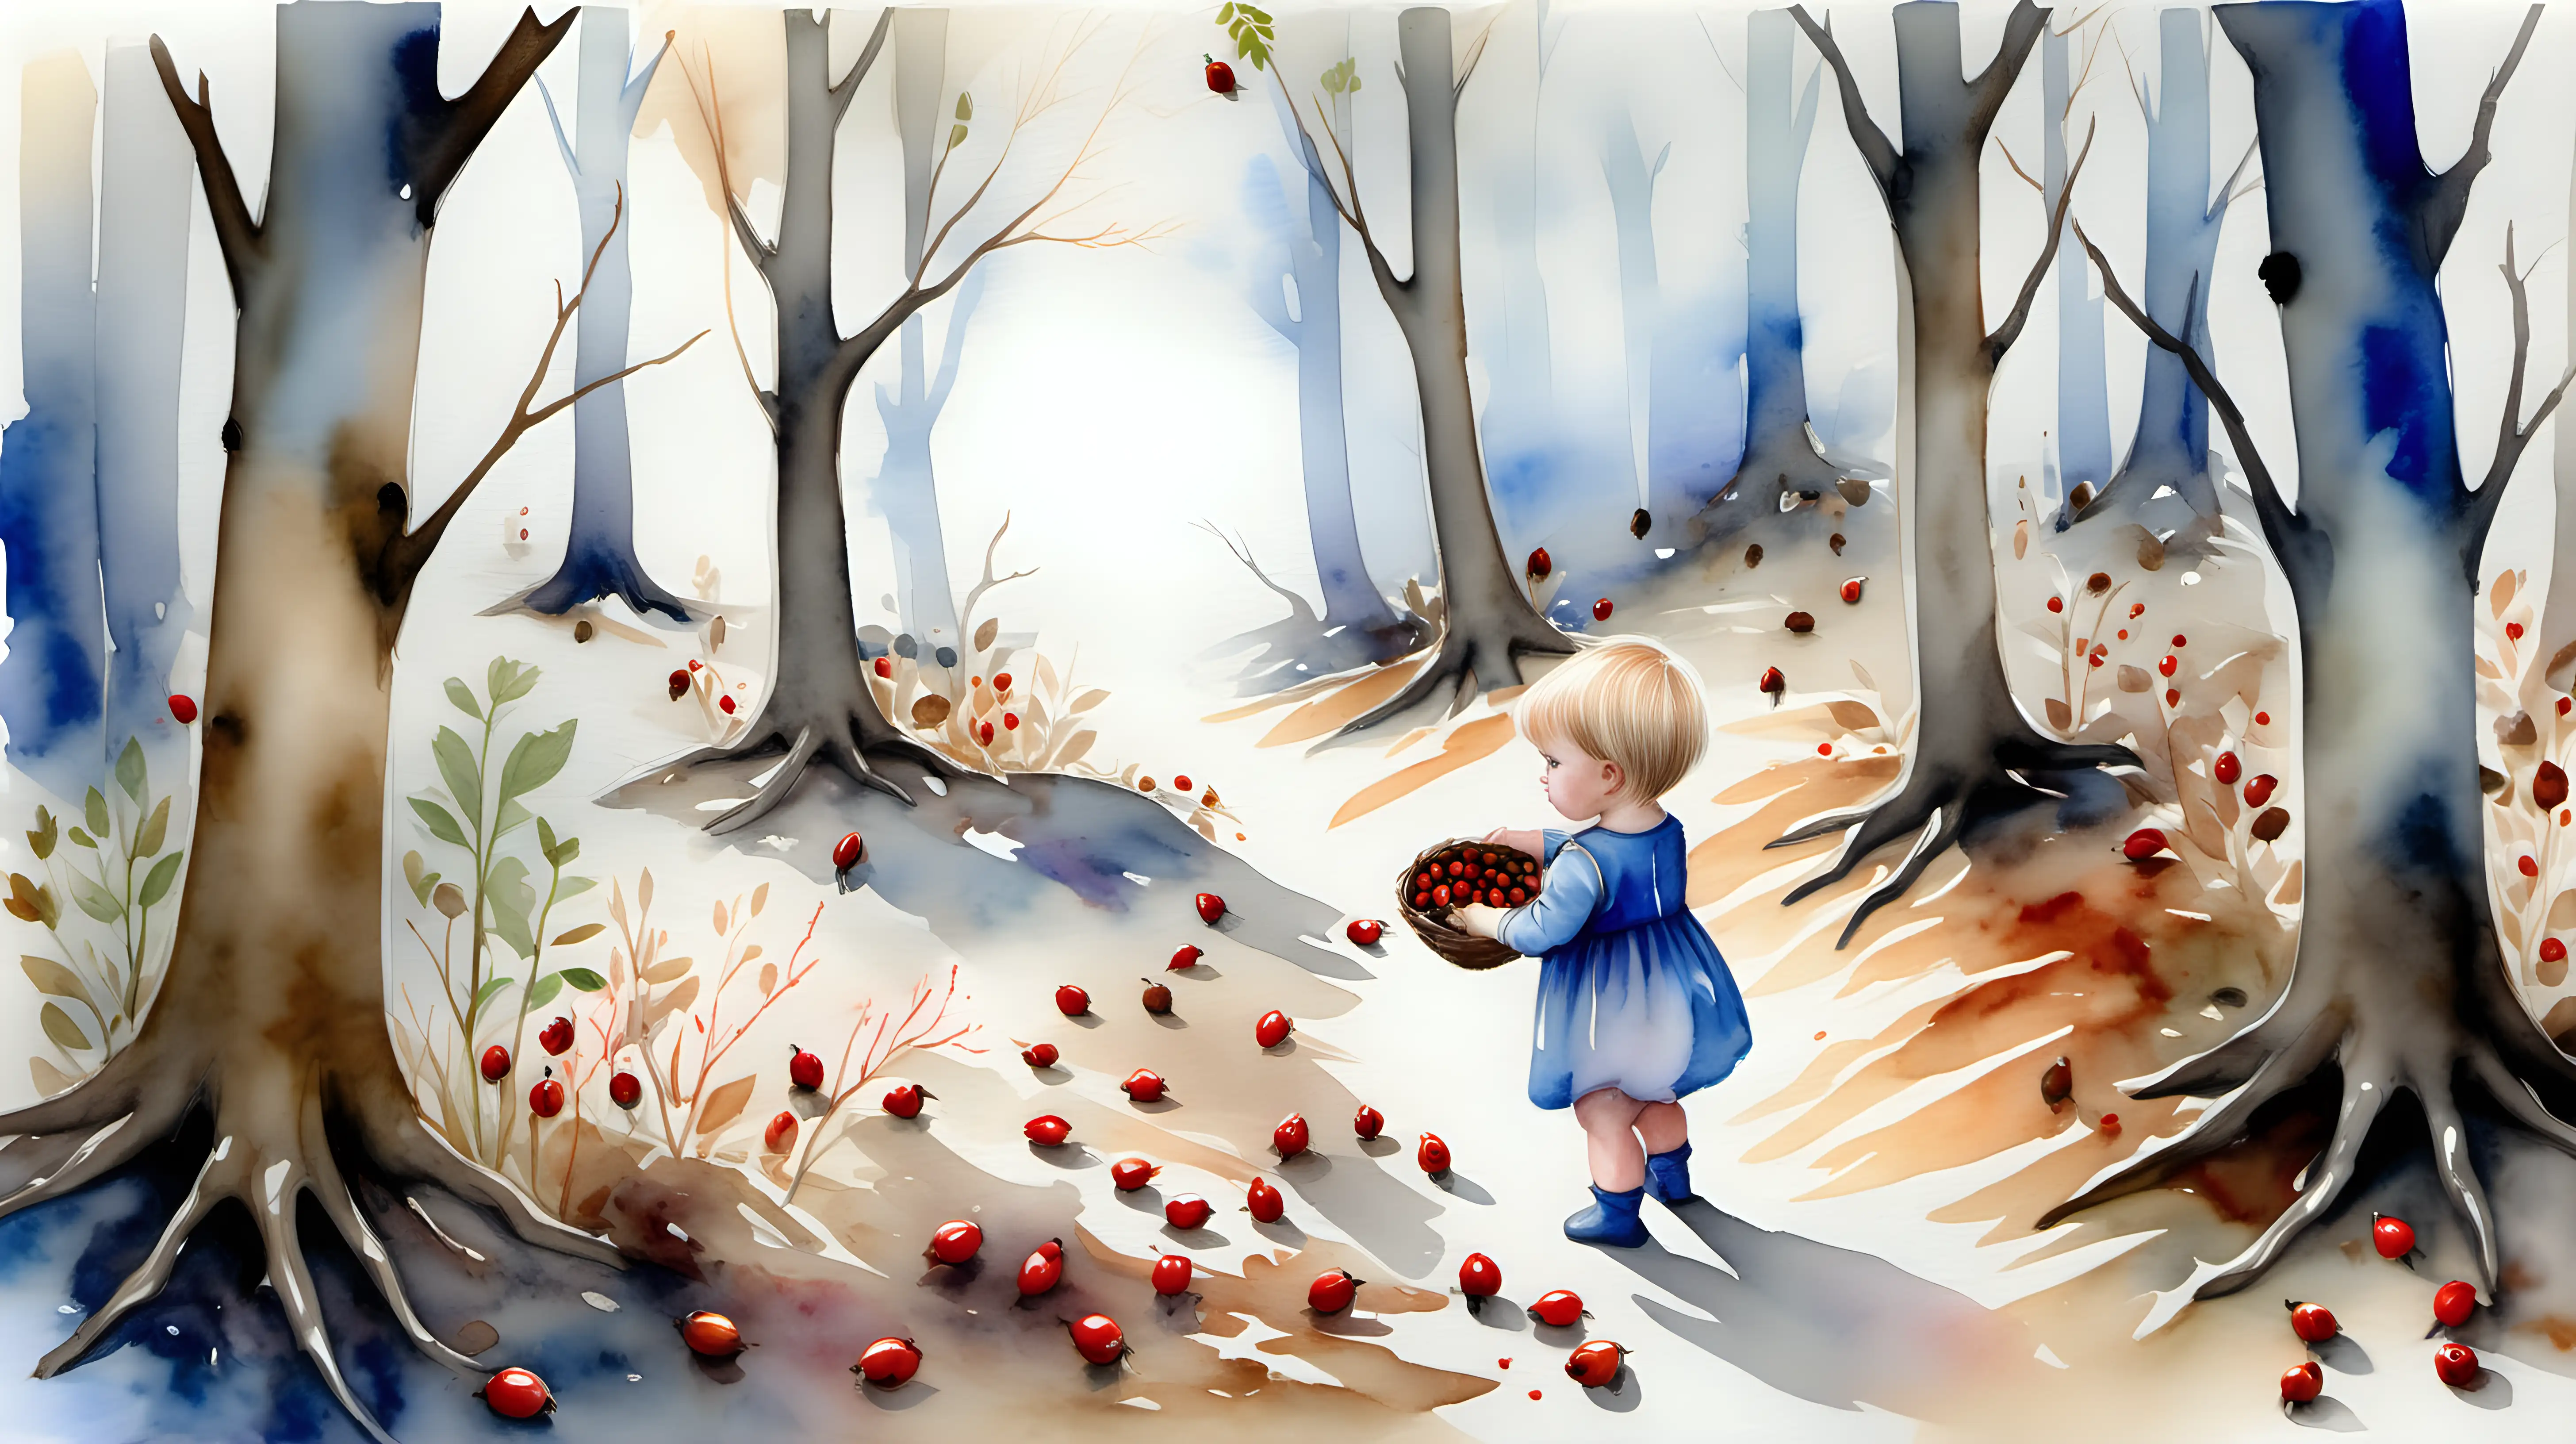 Enchanting Watercolor Fairytale Baby Girl Exploring Rosehips and Acorns in a Magical Woodland